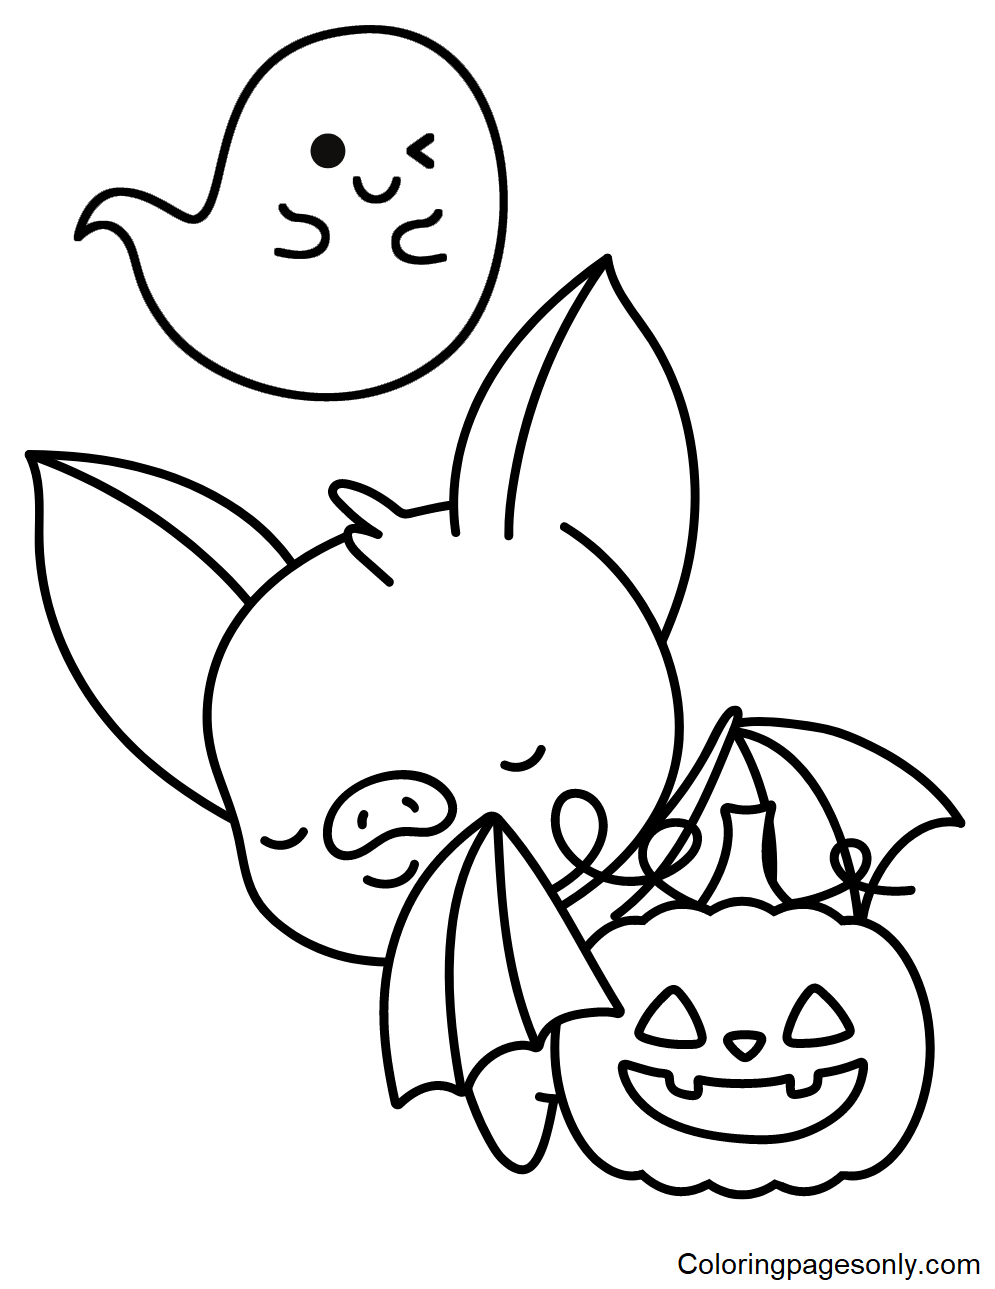 Cute Bat, Ghost, and Pumpkin Coloring Page